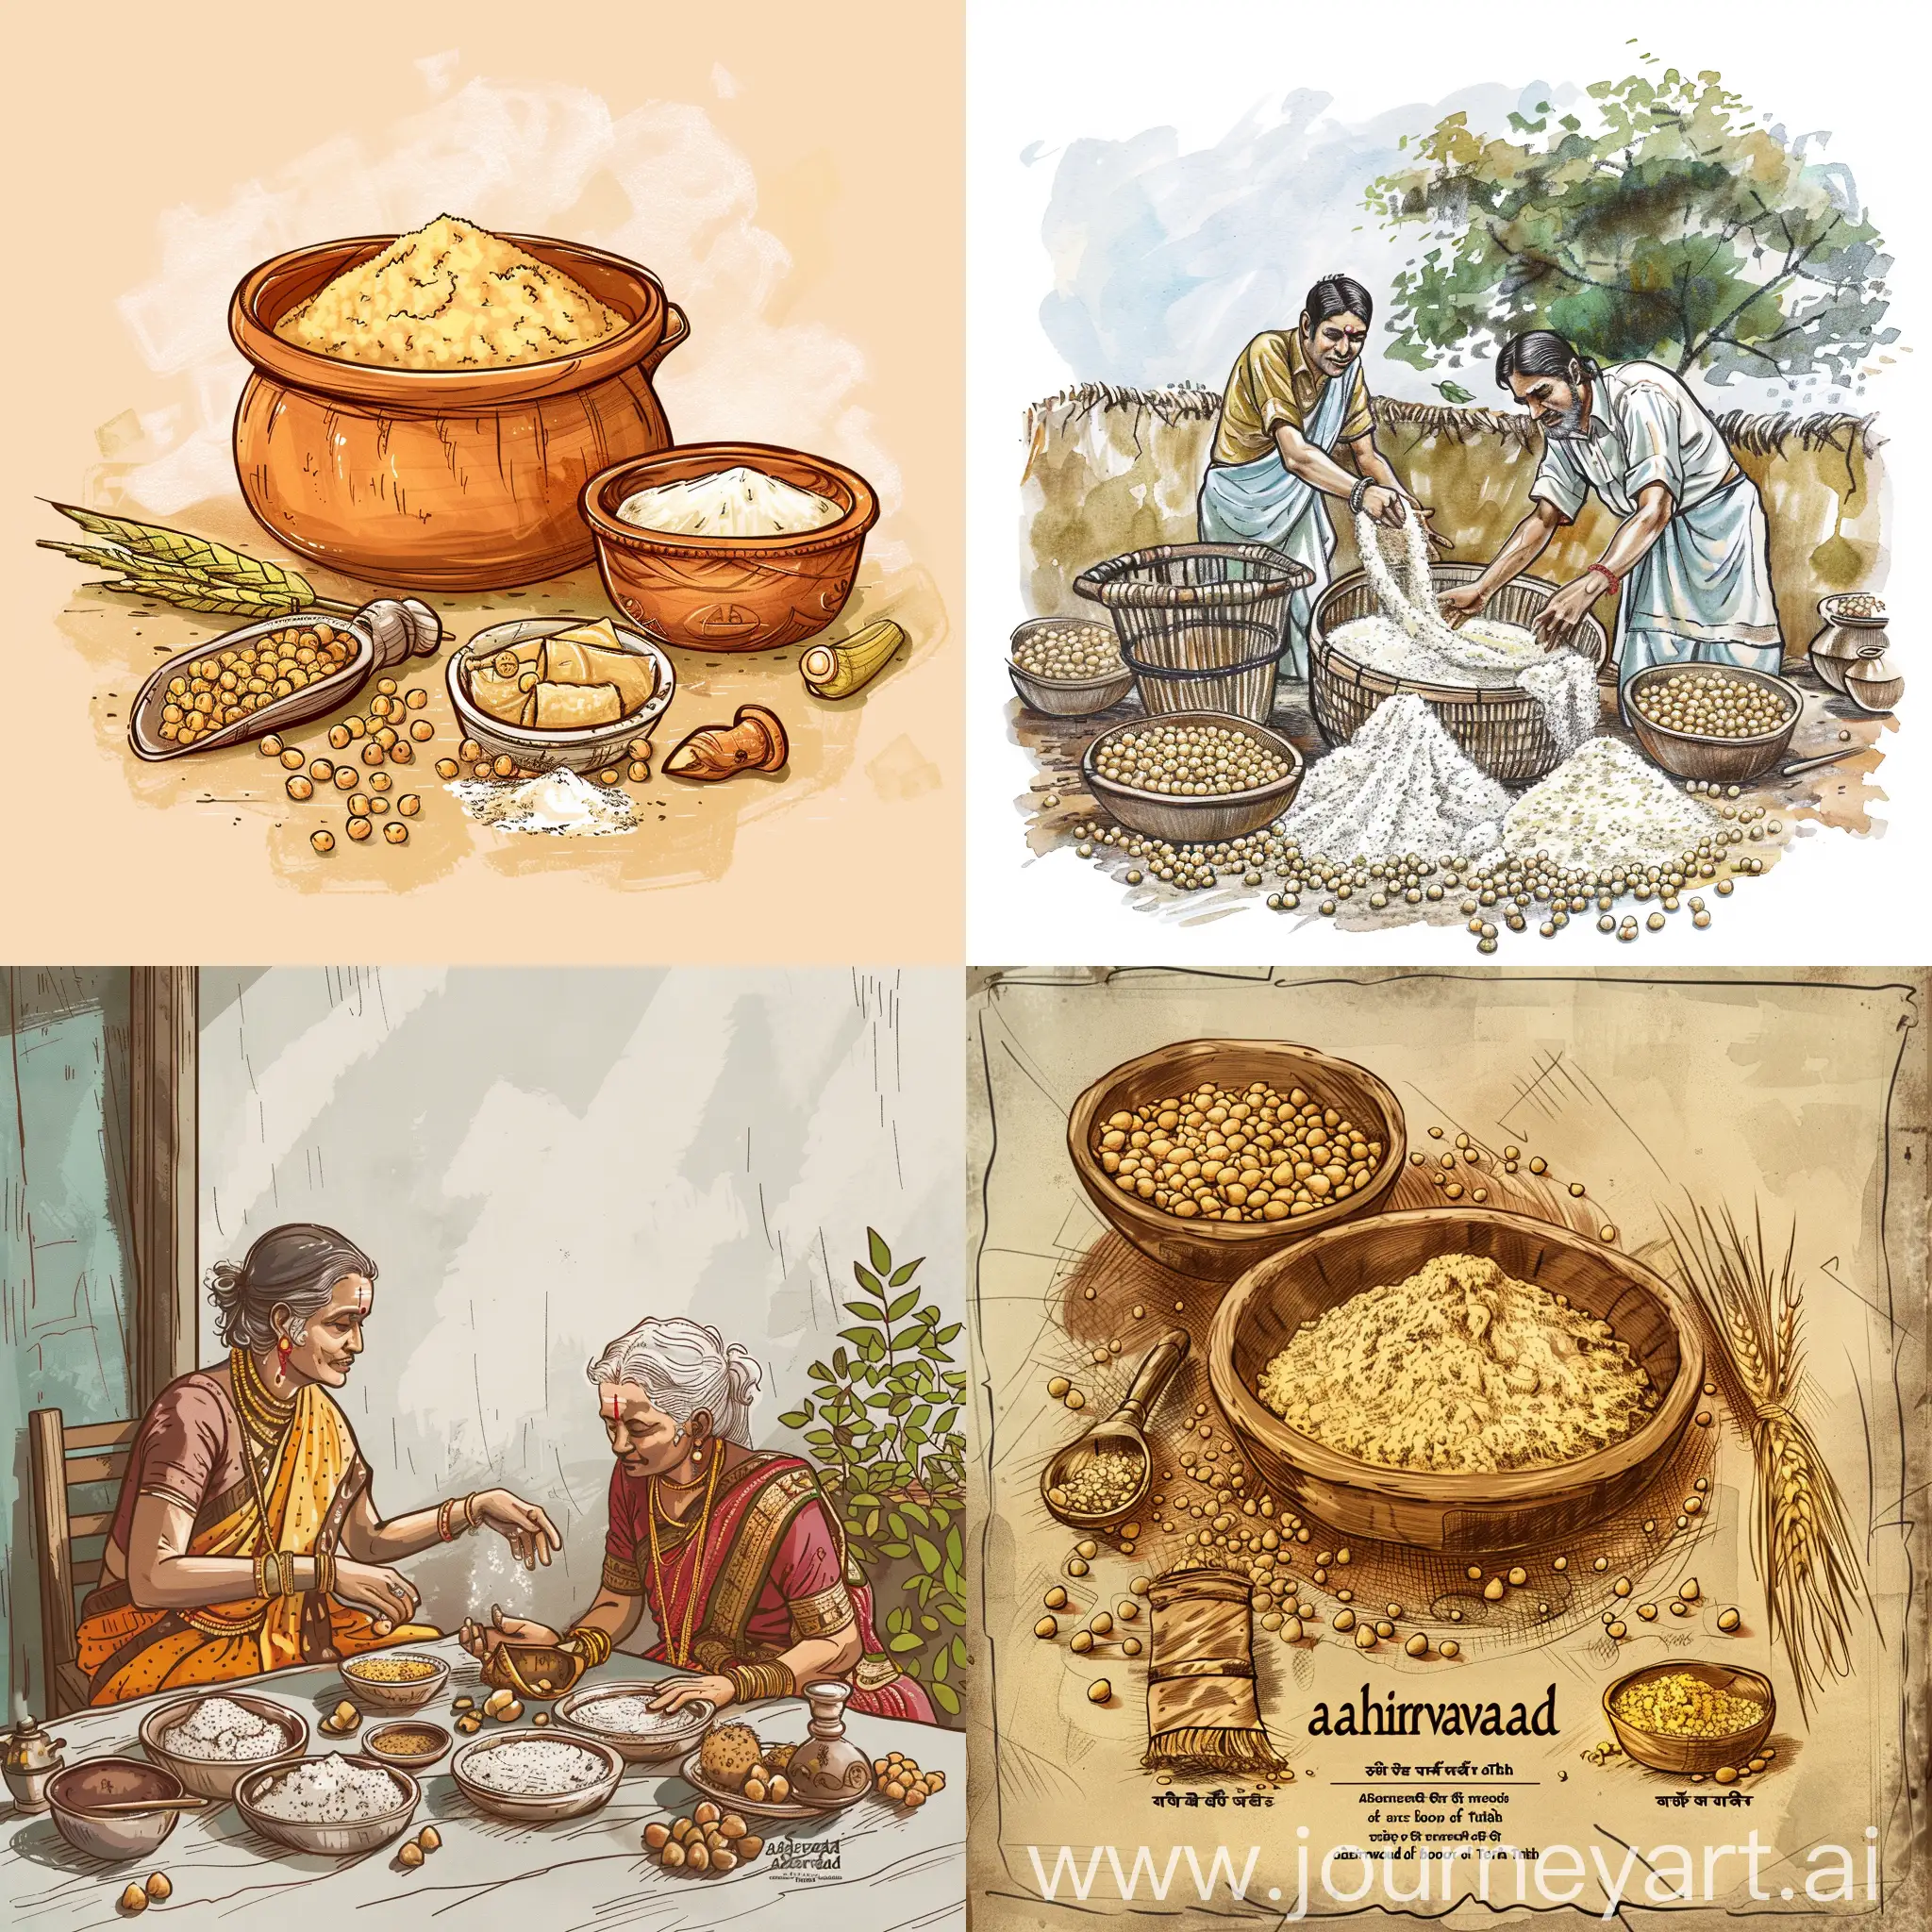 A beautifully drawn (((midjourney))) that focuses on the essence of Attha (a type of Indian flour made from ground chickpeas) and its inherent health attributes. Advanced tokens below the image elaborate on its sweet after taste and many health benefits of Attha. Also include the trust factor people have with aashirvaad brand